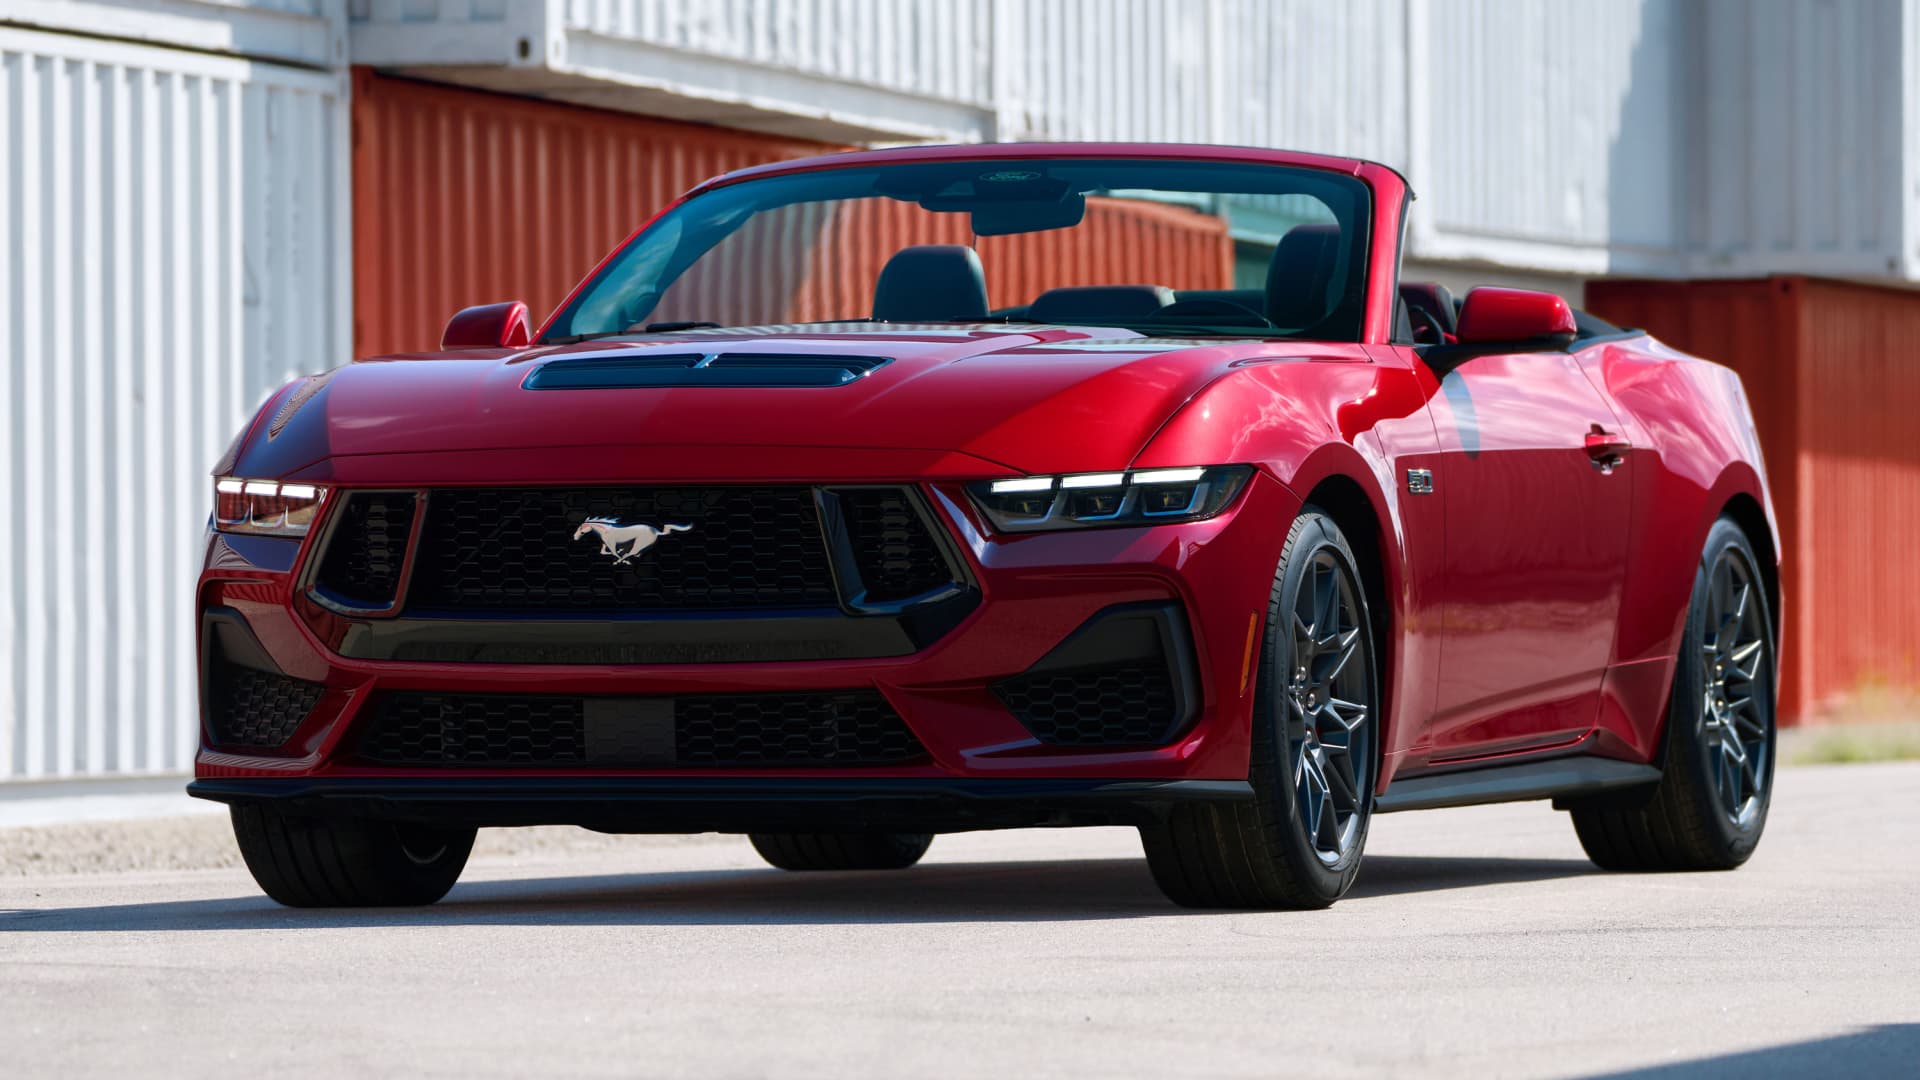 2024 Ford Mustang Gaspowered muscle car to take on electric rivals